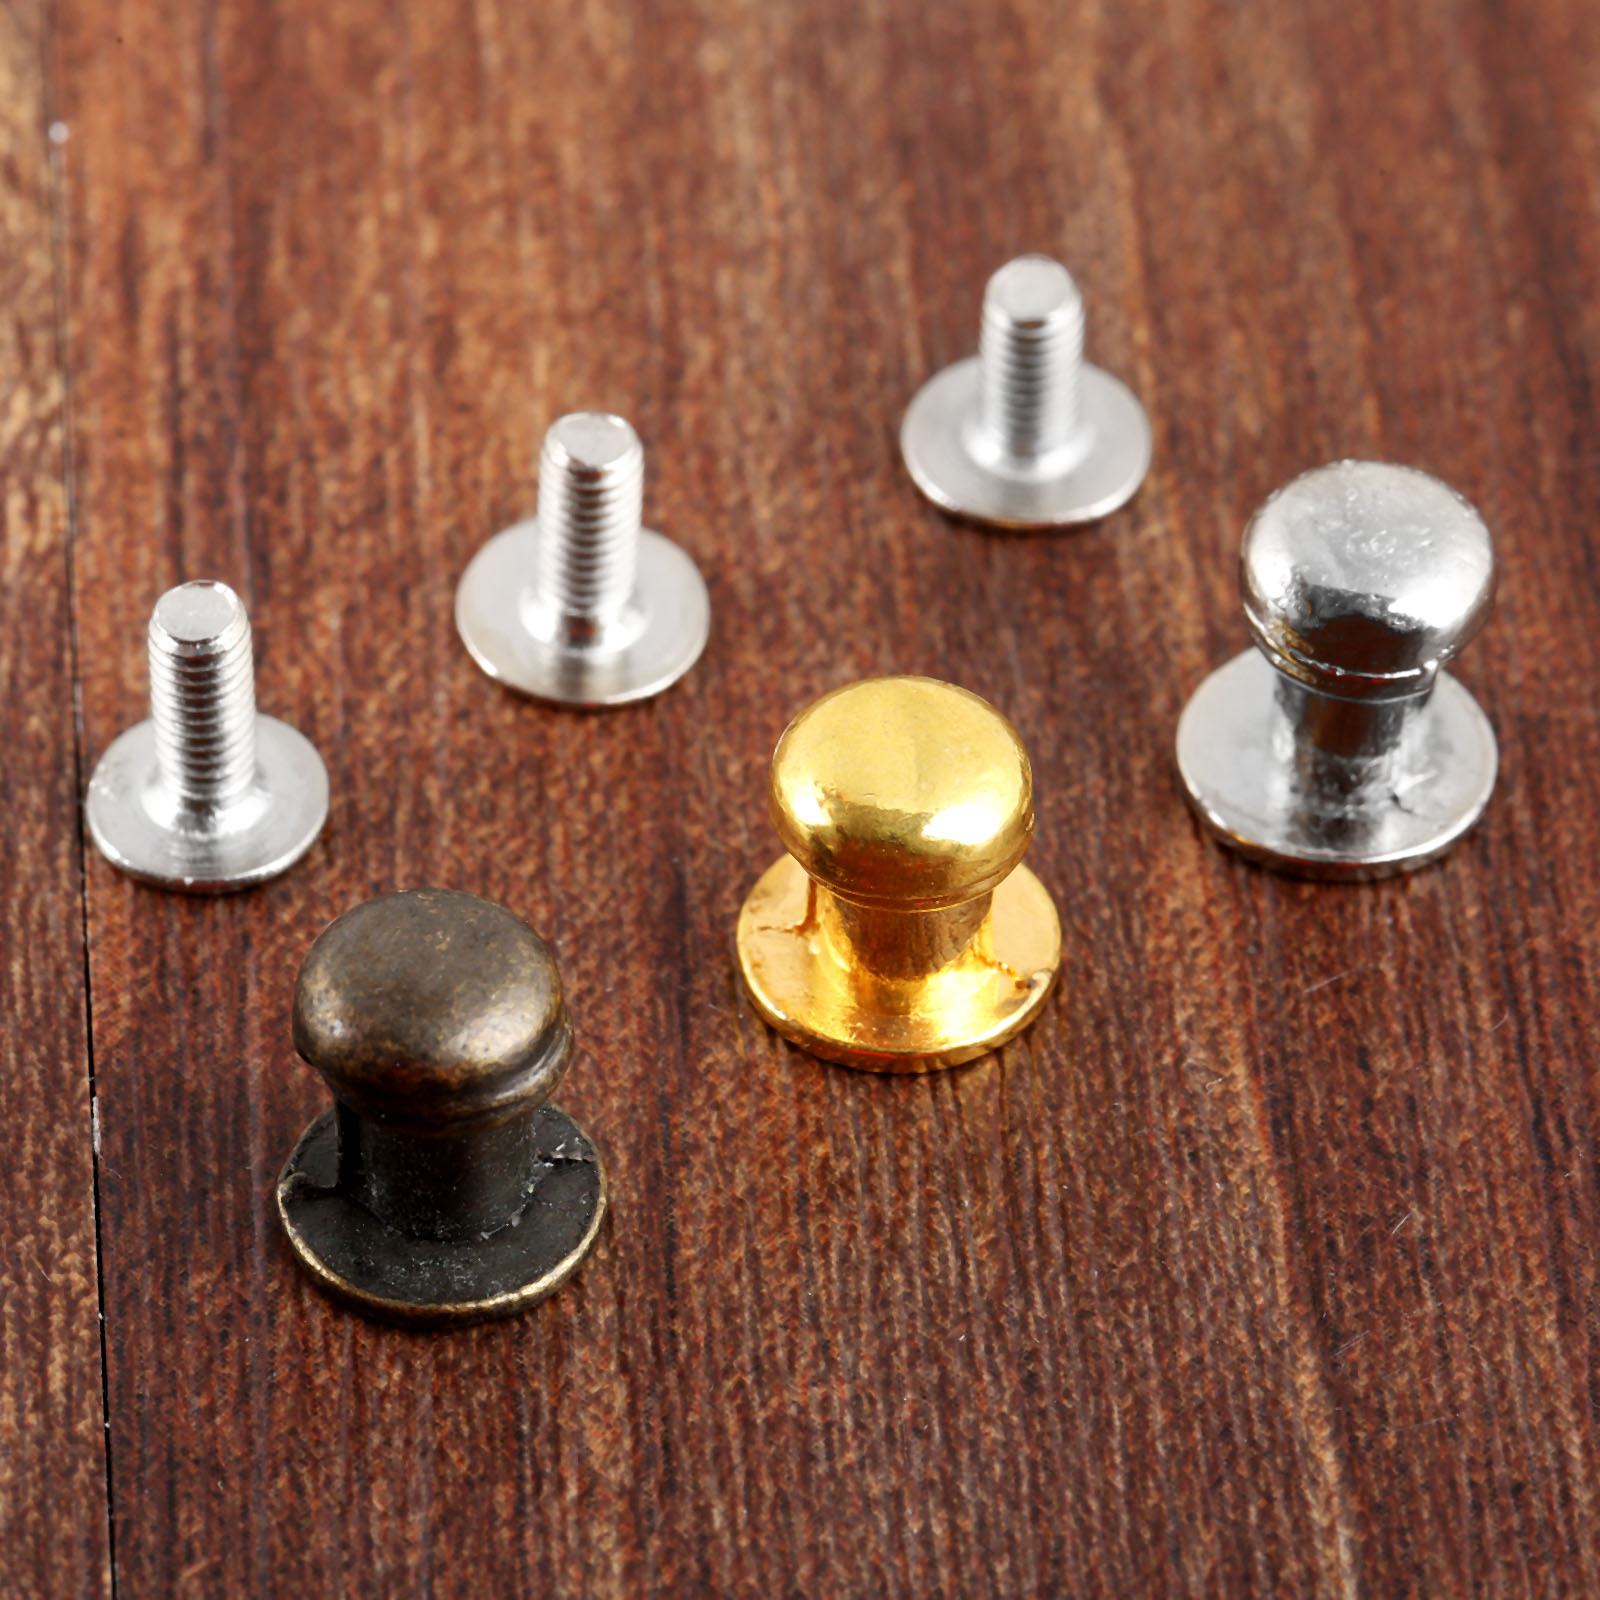 10pcs/lot Mini Knobs Small Handles 7mm*10mm Pull Antique Bronze/Silver/Gold Jewelry Wooden Box Drawer Cabinet Hardware w/screw